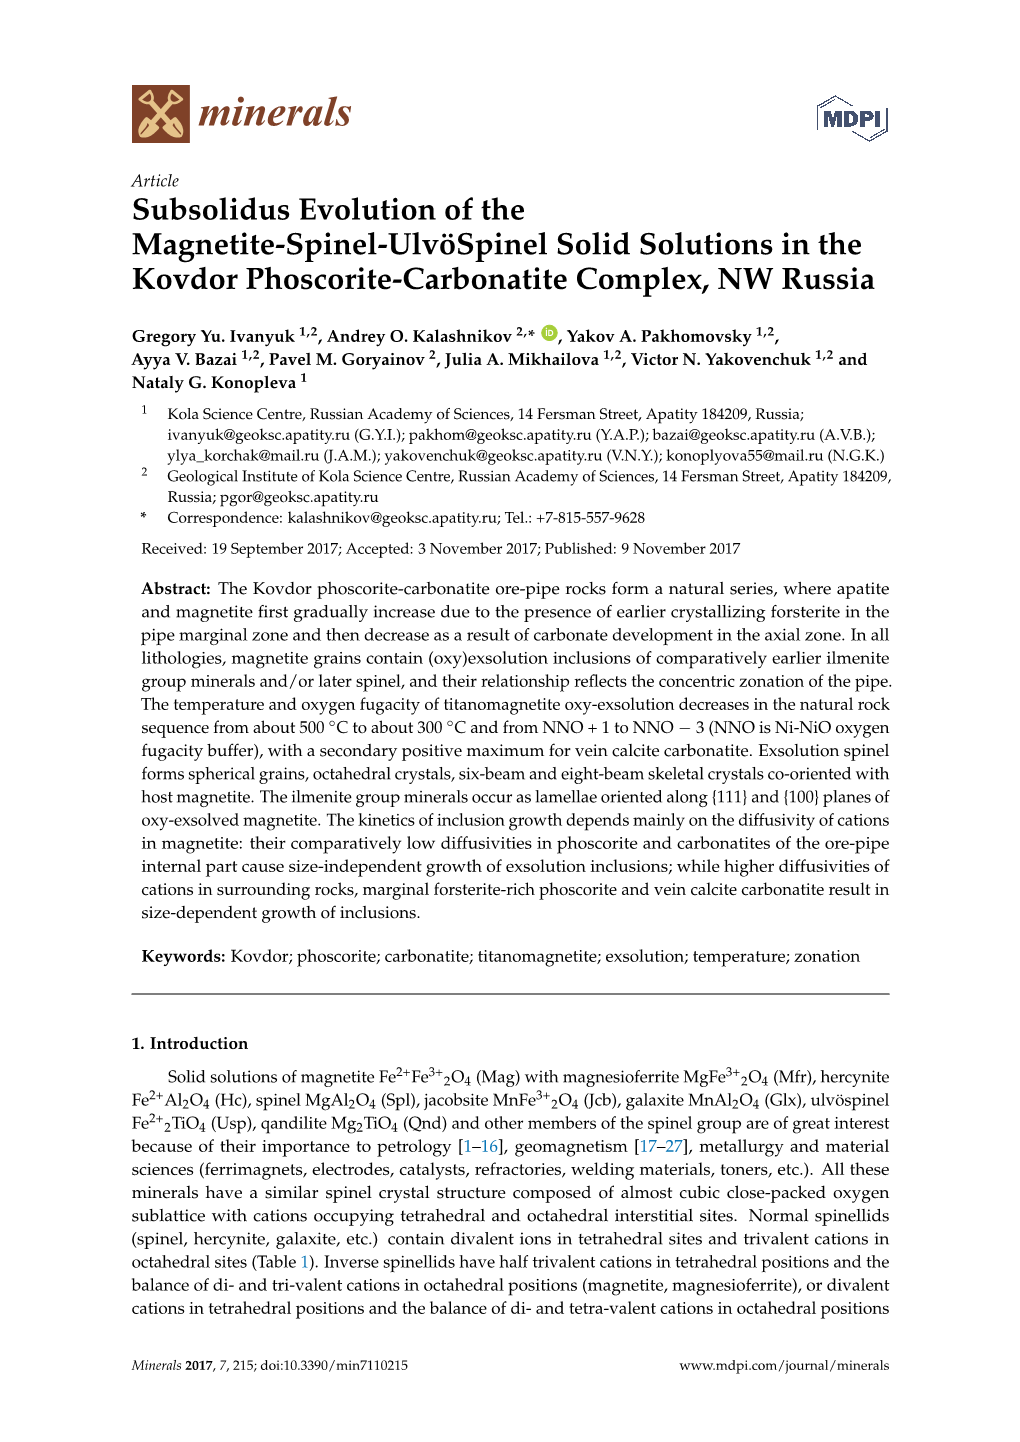 Subsolidus Evolution of the Magnetite-Spinel-Ulvöspinel Solid Solutions in the Kovdor Phoscorite-Carbonatite Complex, NW Russia